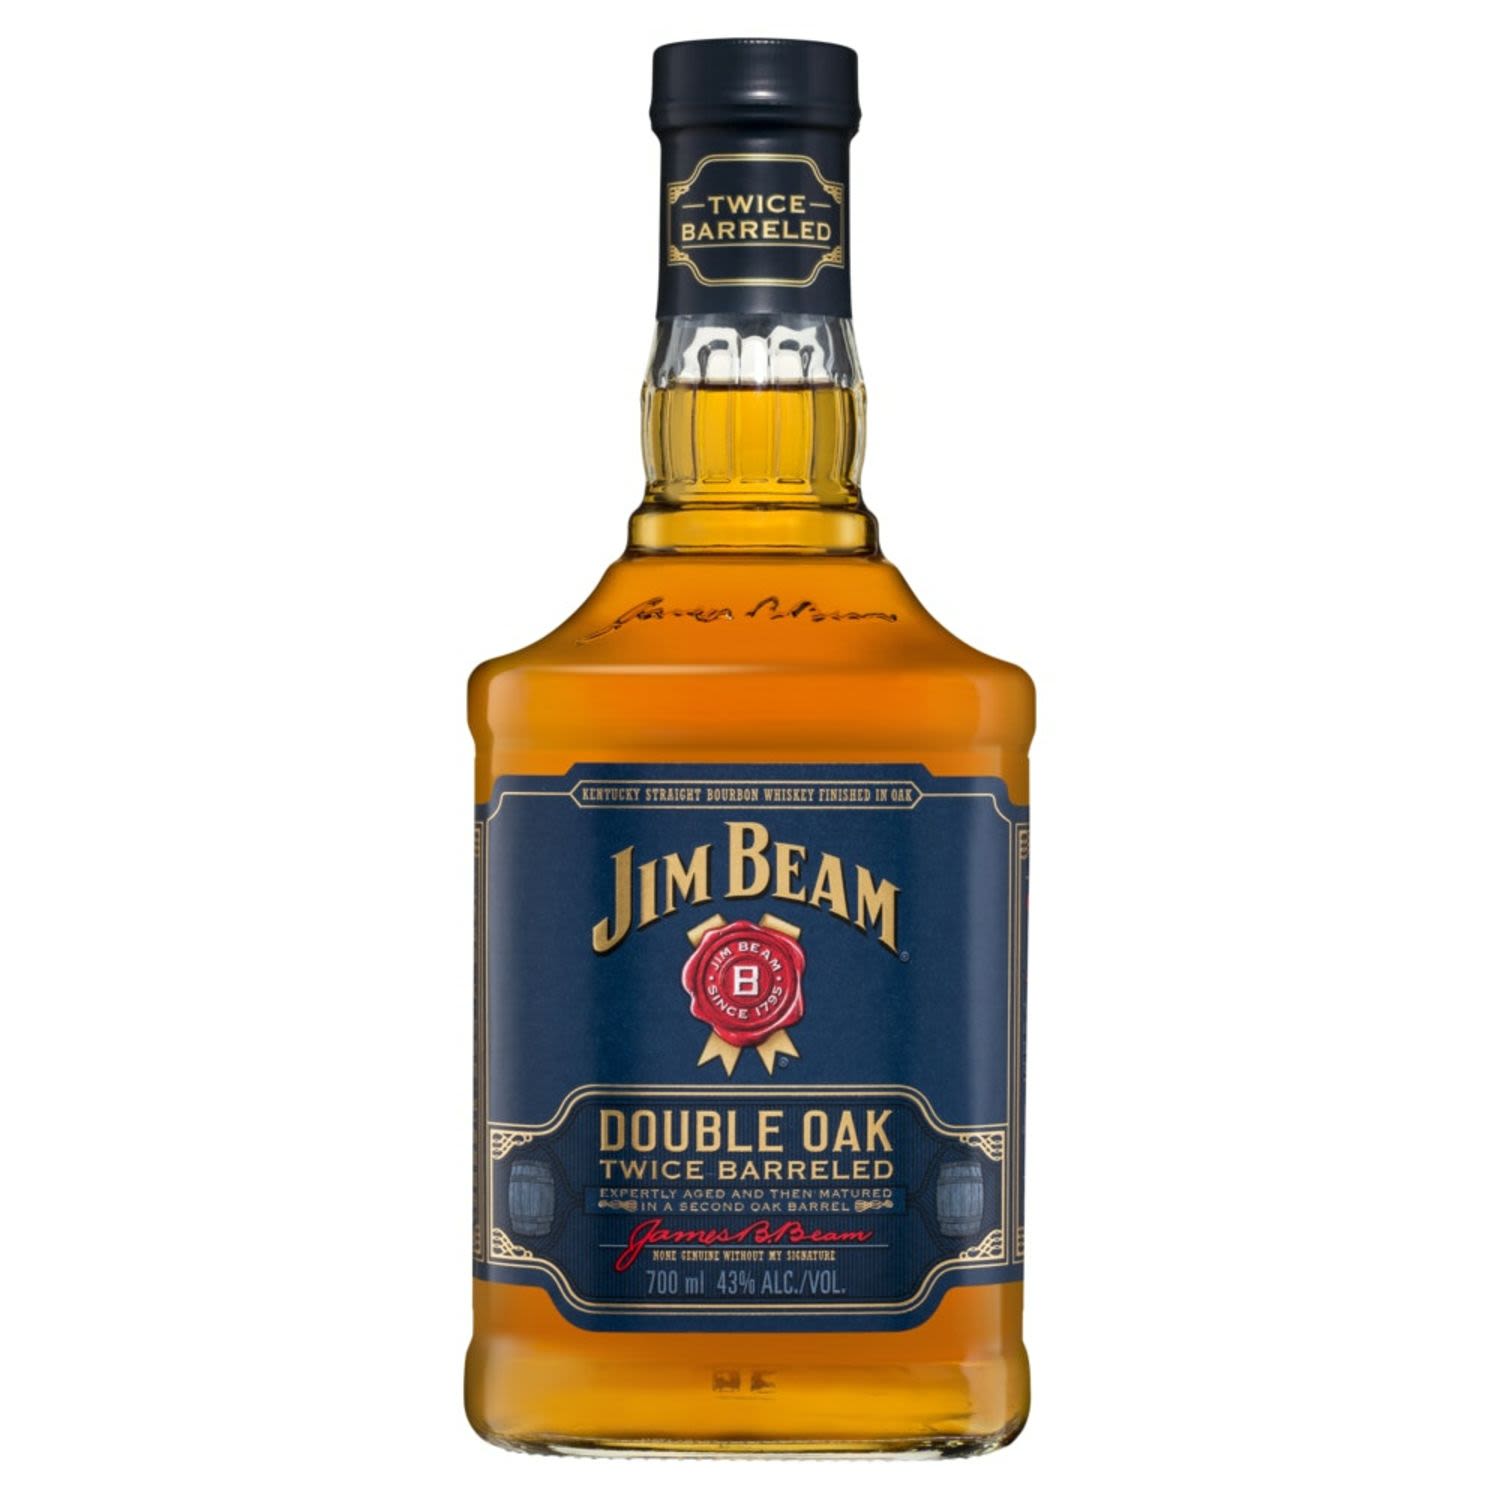 Jim Beam Double Oak takes bourbon aging to the next level by using a multi-barrelled approach. It all starts with Jim Beam®, the World’s #1 Bourbon. Then, after the traditional 4-year aging process, the bourbon is transferred to a second freshly charred American White Oak barrel and aged to taste. This second barrelling allows the liquid to develop an even deeper level of intense, spiced oakiness and rich caramel, creating a truly unique bourbon whiskey.<br /> <br />Alcohol Volume: 43.00%<br /><br />Pack Format: Bottle<br /><br />Standard Drinks: 23.8</br /><br />Pack Type: Bottle<br /><br />Country of Origin: USA<br />